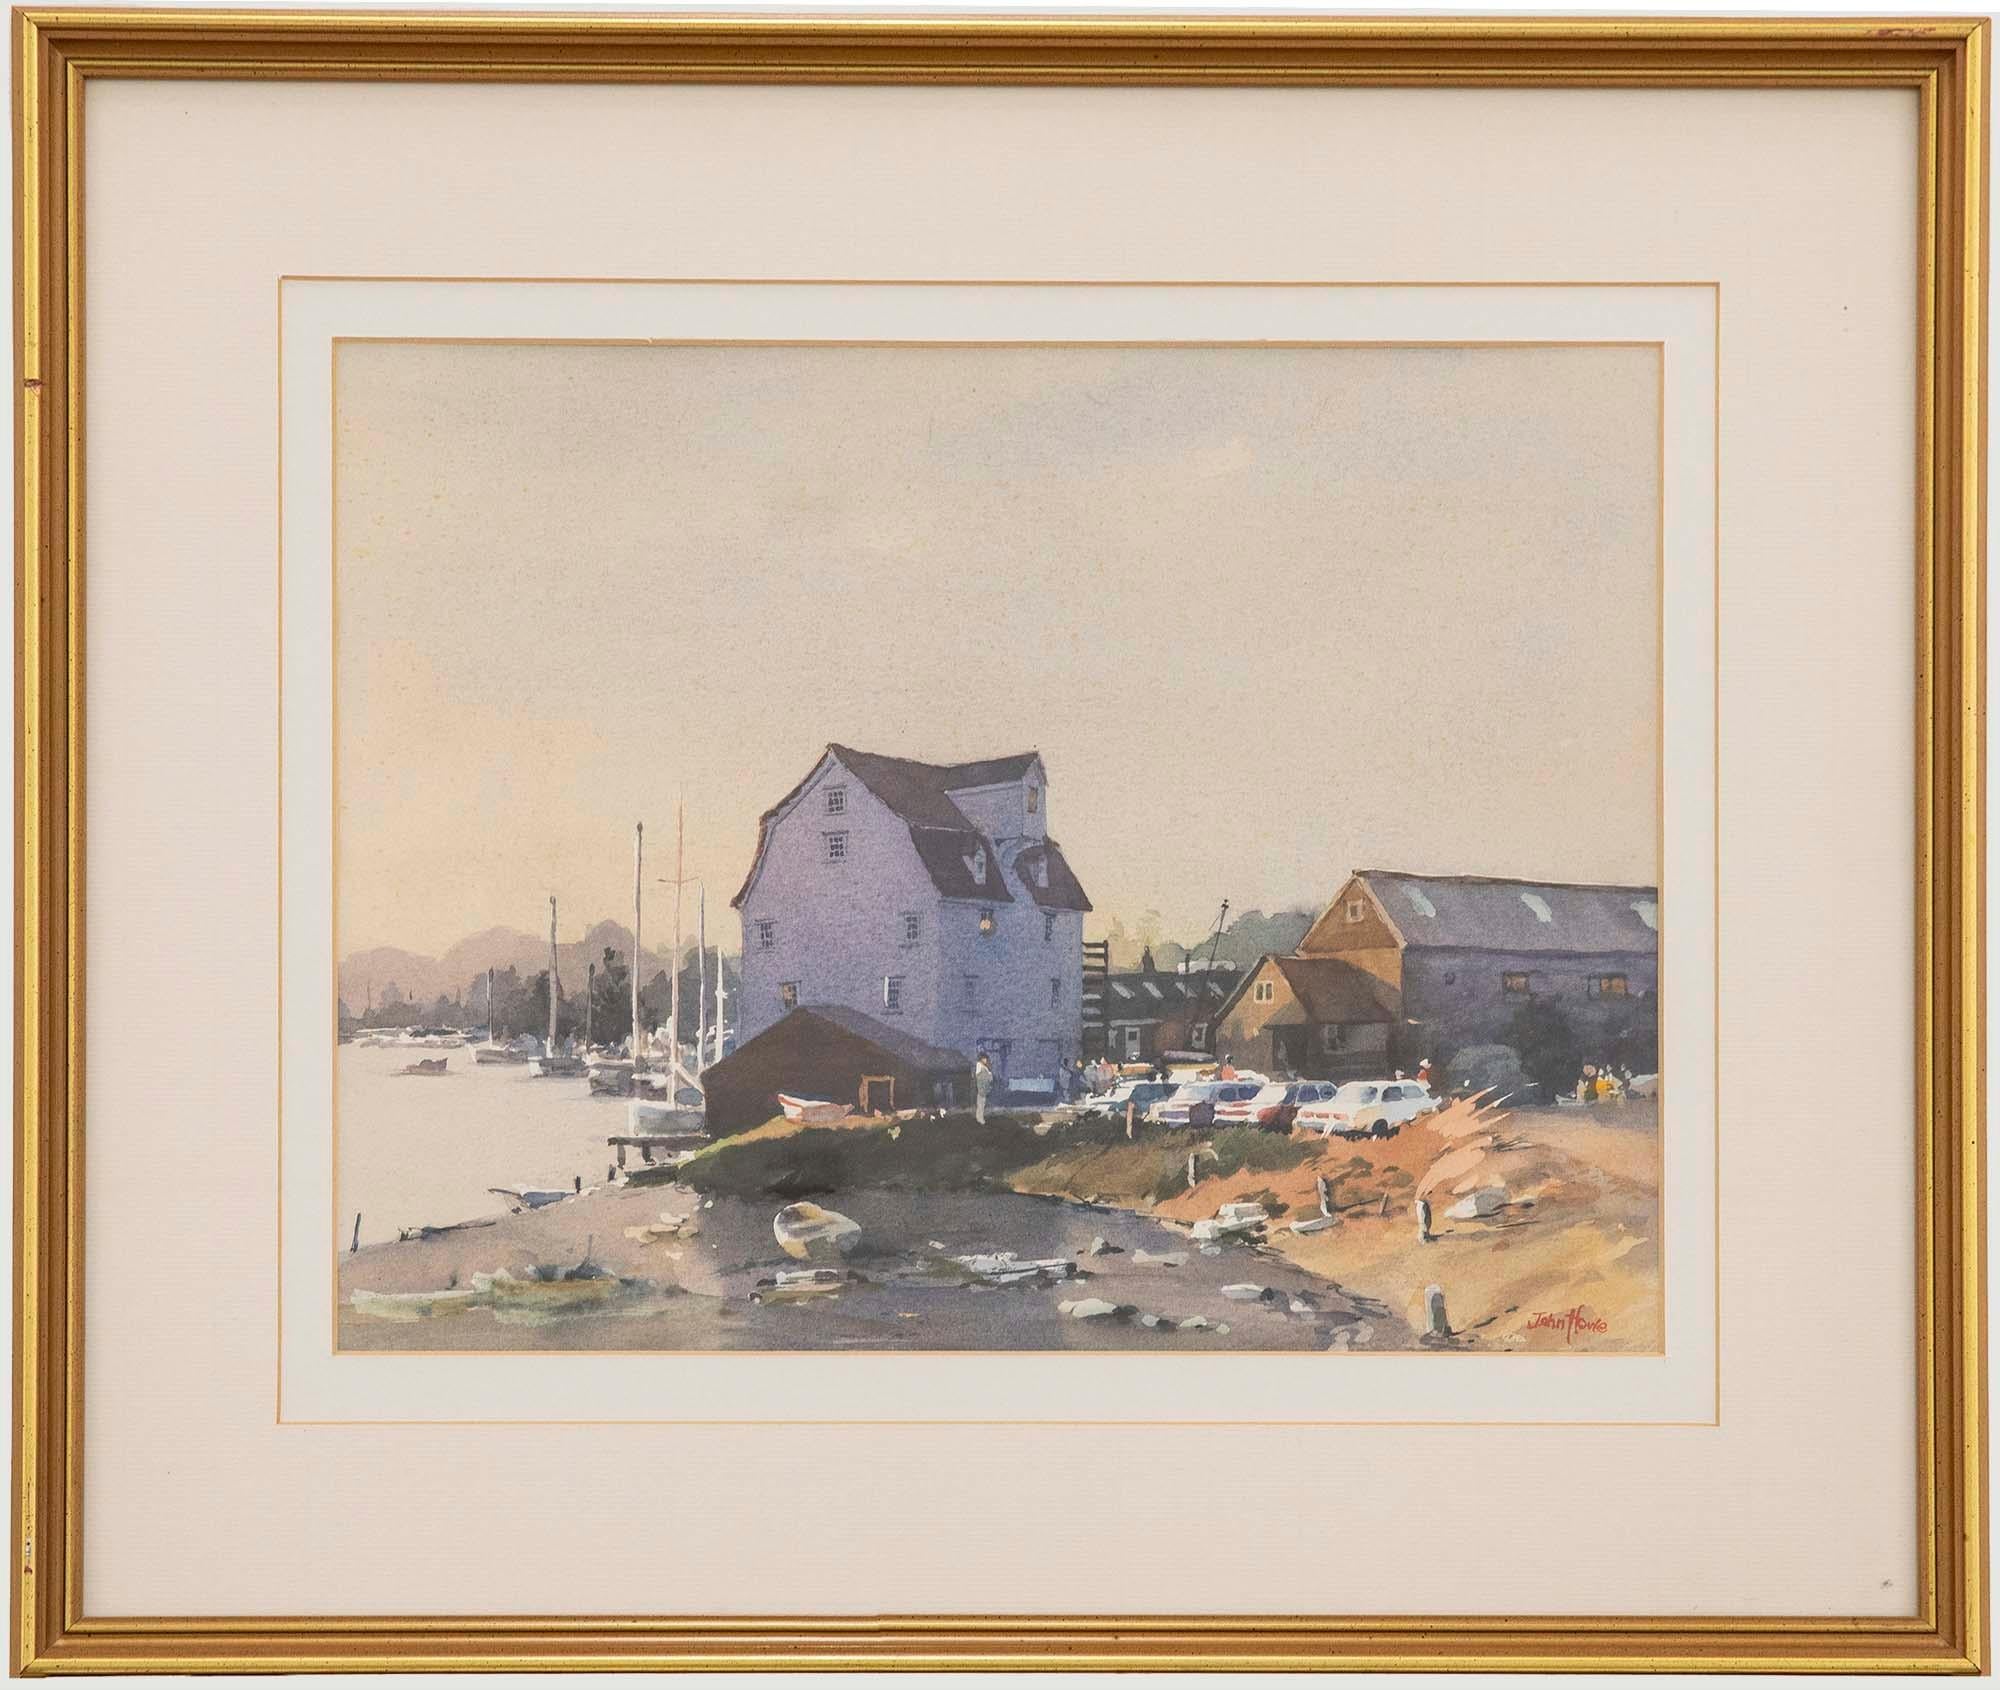 A serene watercolour scene of sailing boats at the club house by marine artist John Howe. As the sun falls, a soft purple hue washes over the water and buildings with glimpses of figures gathered round parked cars. Signed by the artist to the lower